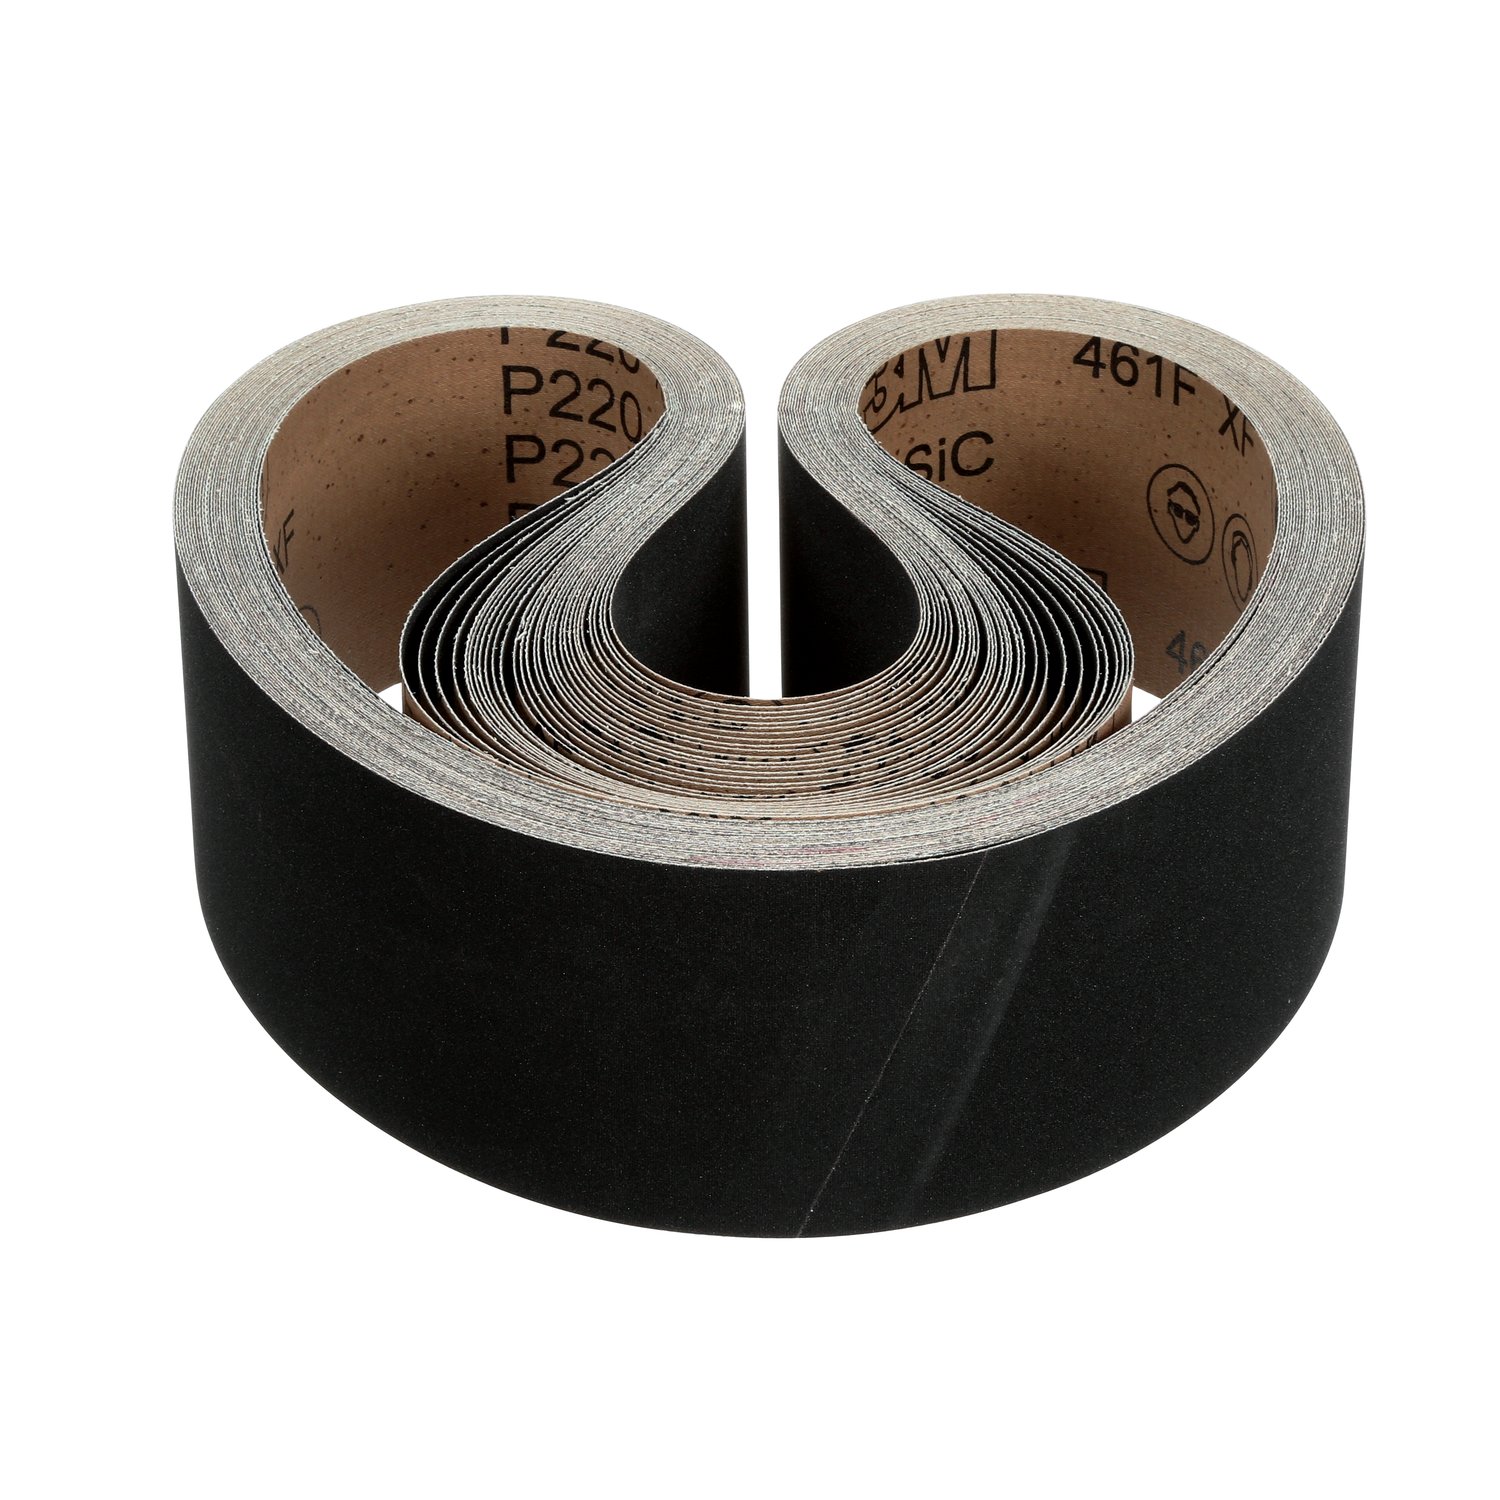 7100189051 - 3M Cloth Belt 461F, P120 XF-weight, 4 in x 132 in, Sine-lok 45° Angle,
Precision Roll Grinding, 50 ea/Case